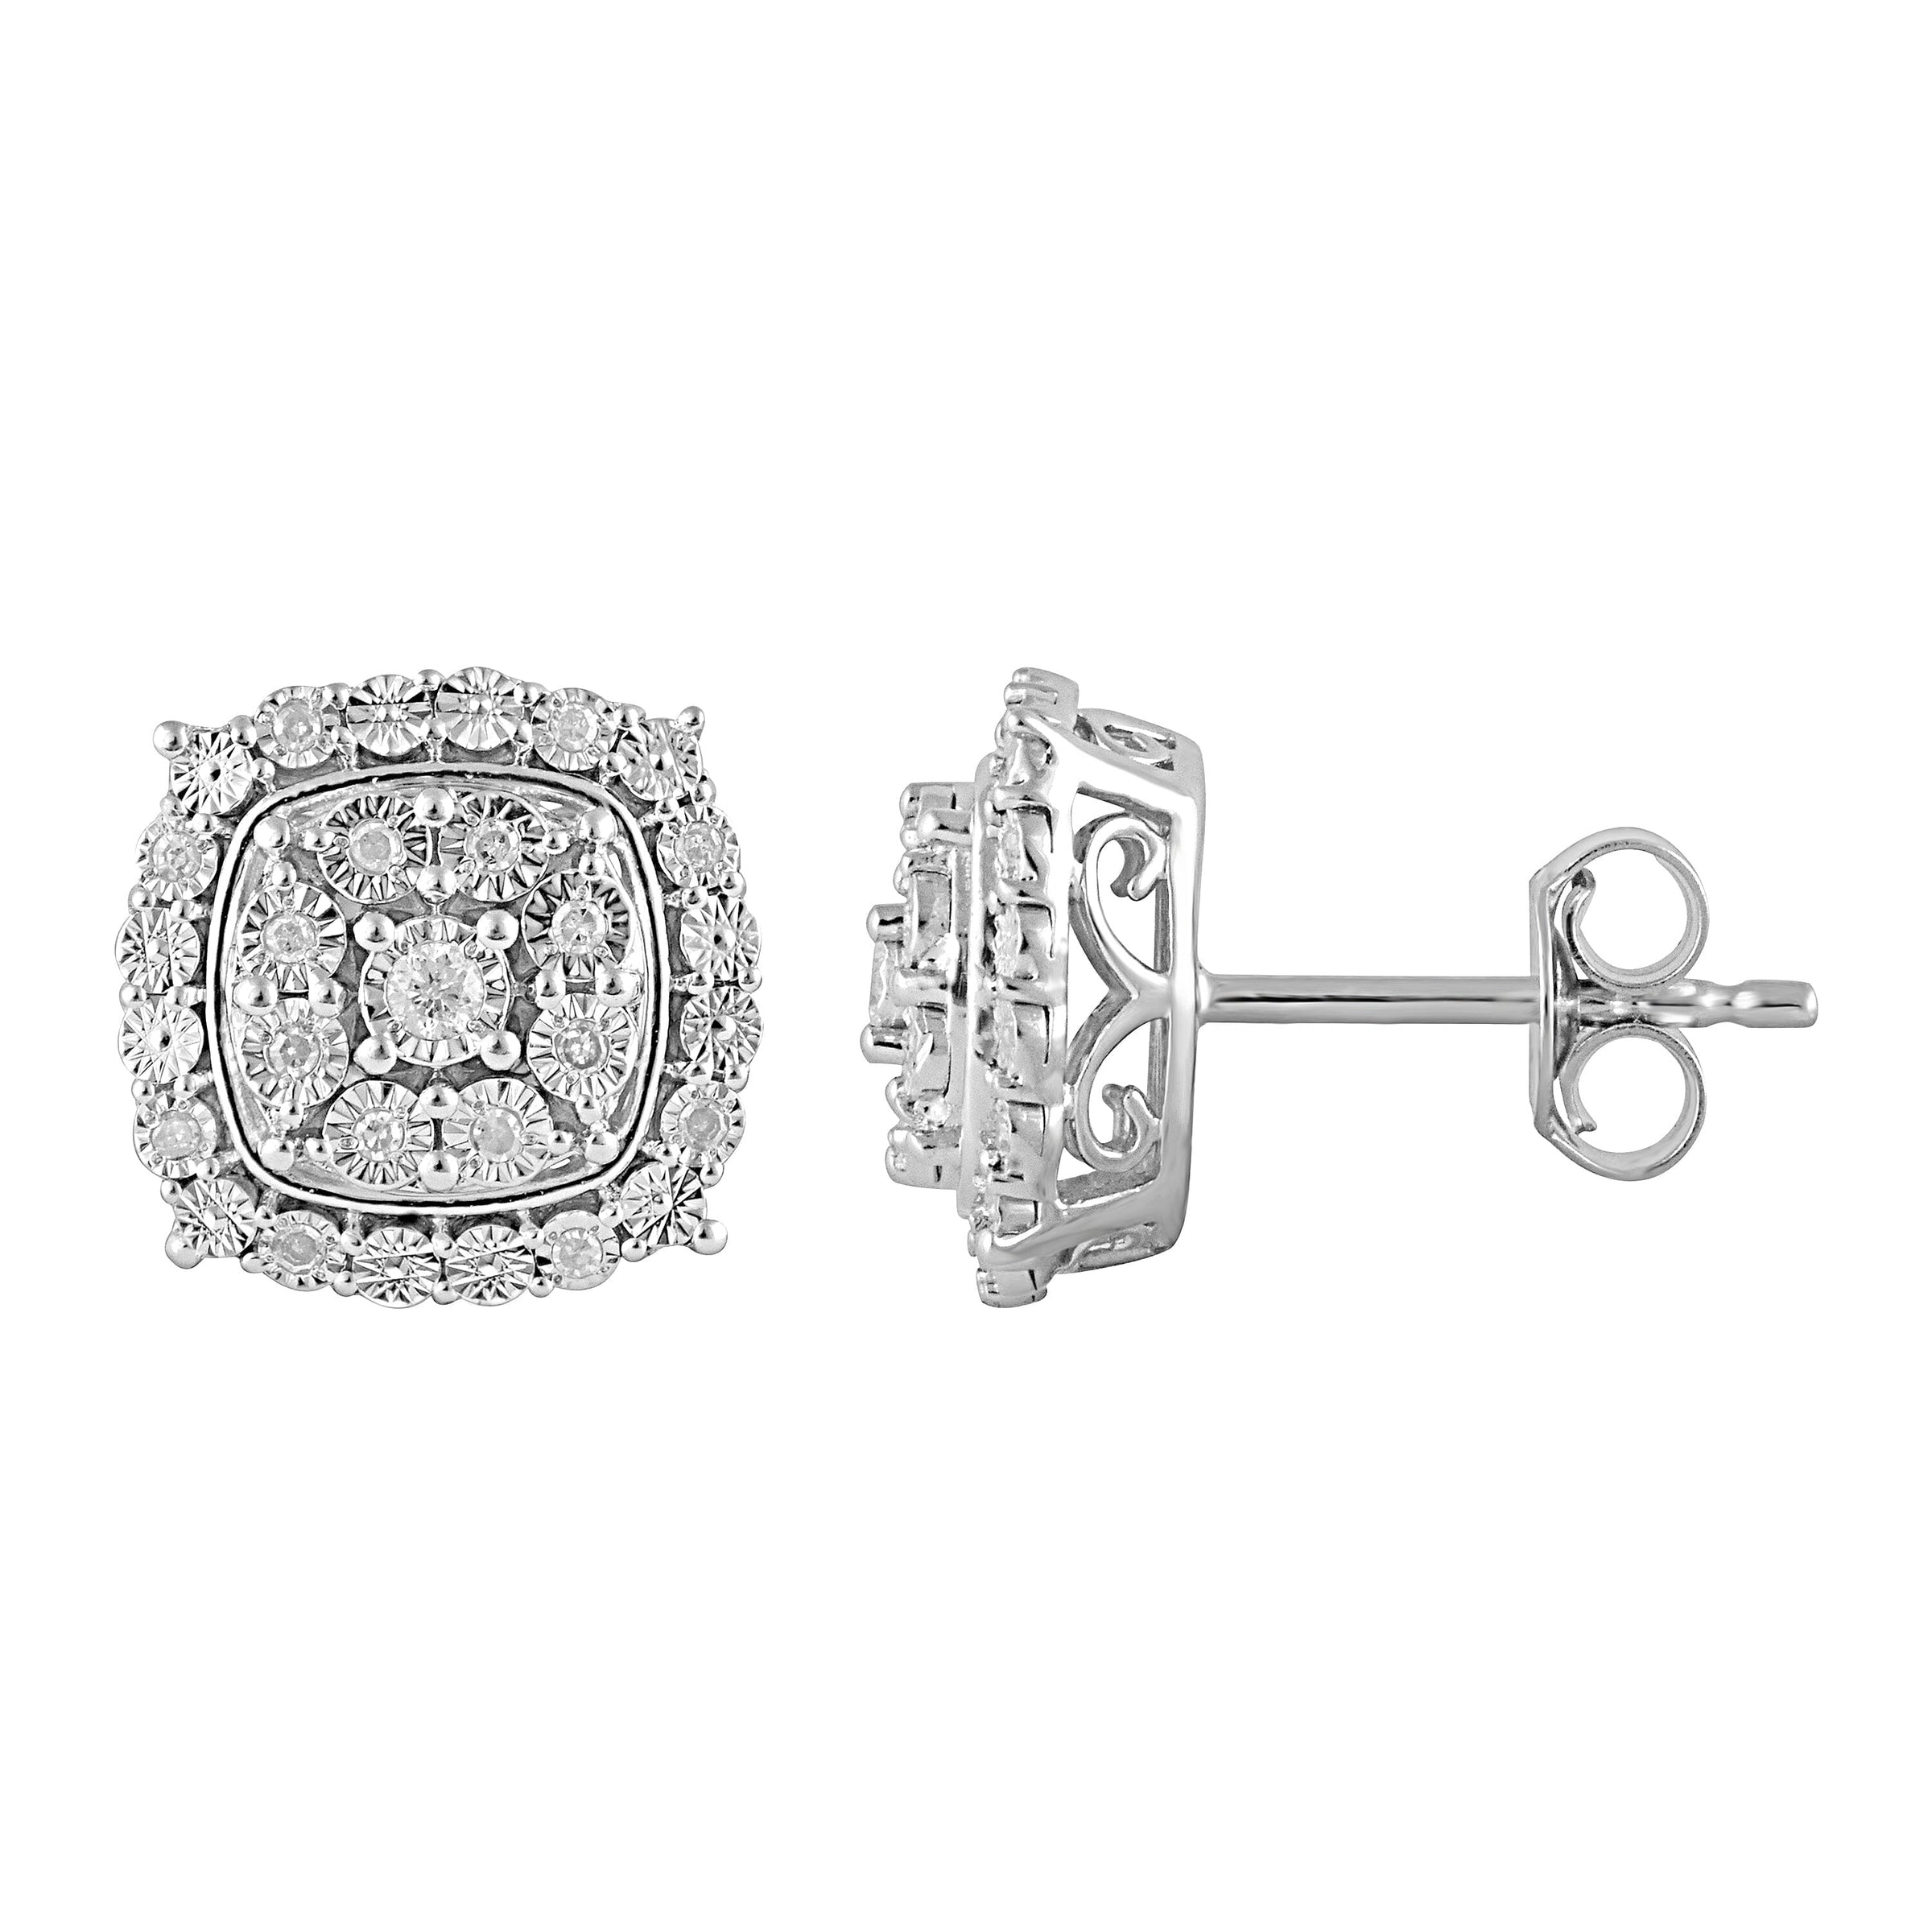 Halo Square Look Earrings with 0.15ct of Diamonds in Sterling Silver Earrings Bevilles 